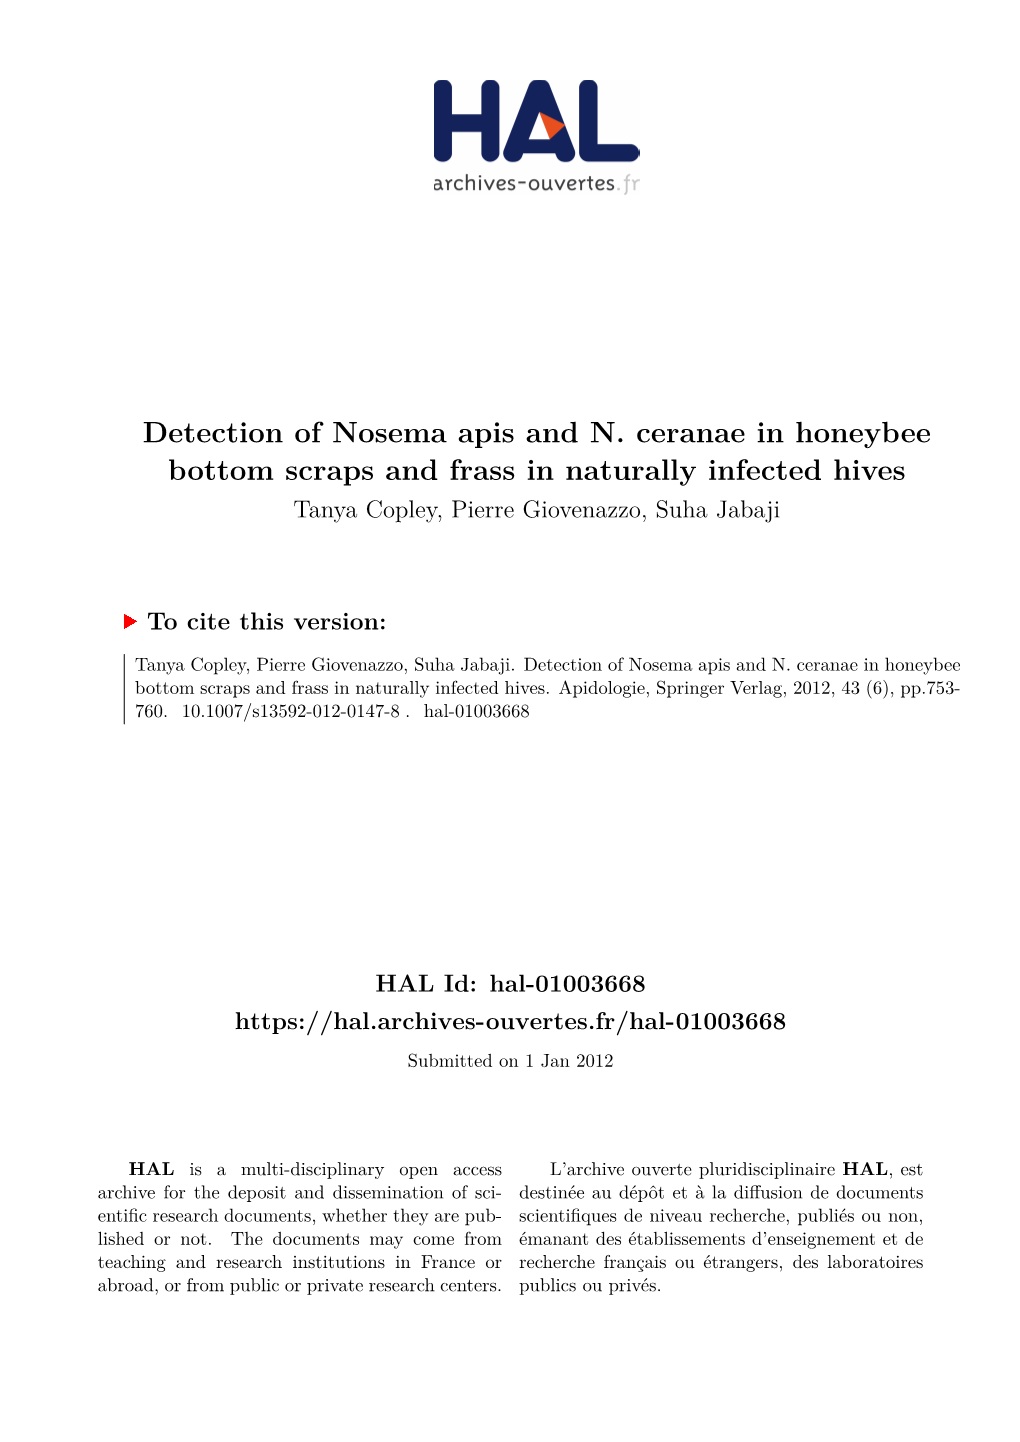 Detection of Nosema Apis and N. Ceranae in Honeybee Bottom Scraps and Frass in Naturally Infected Hives Tanya Copley, Pierre Giovenazzo, Suha Jabaji